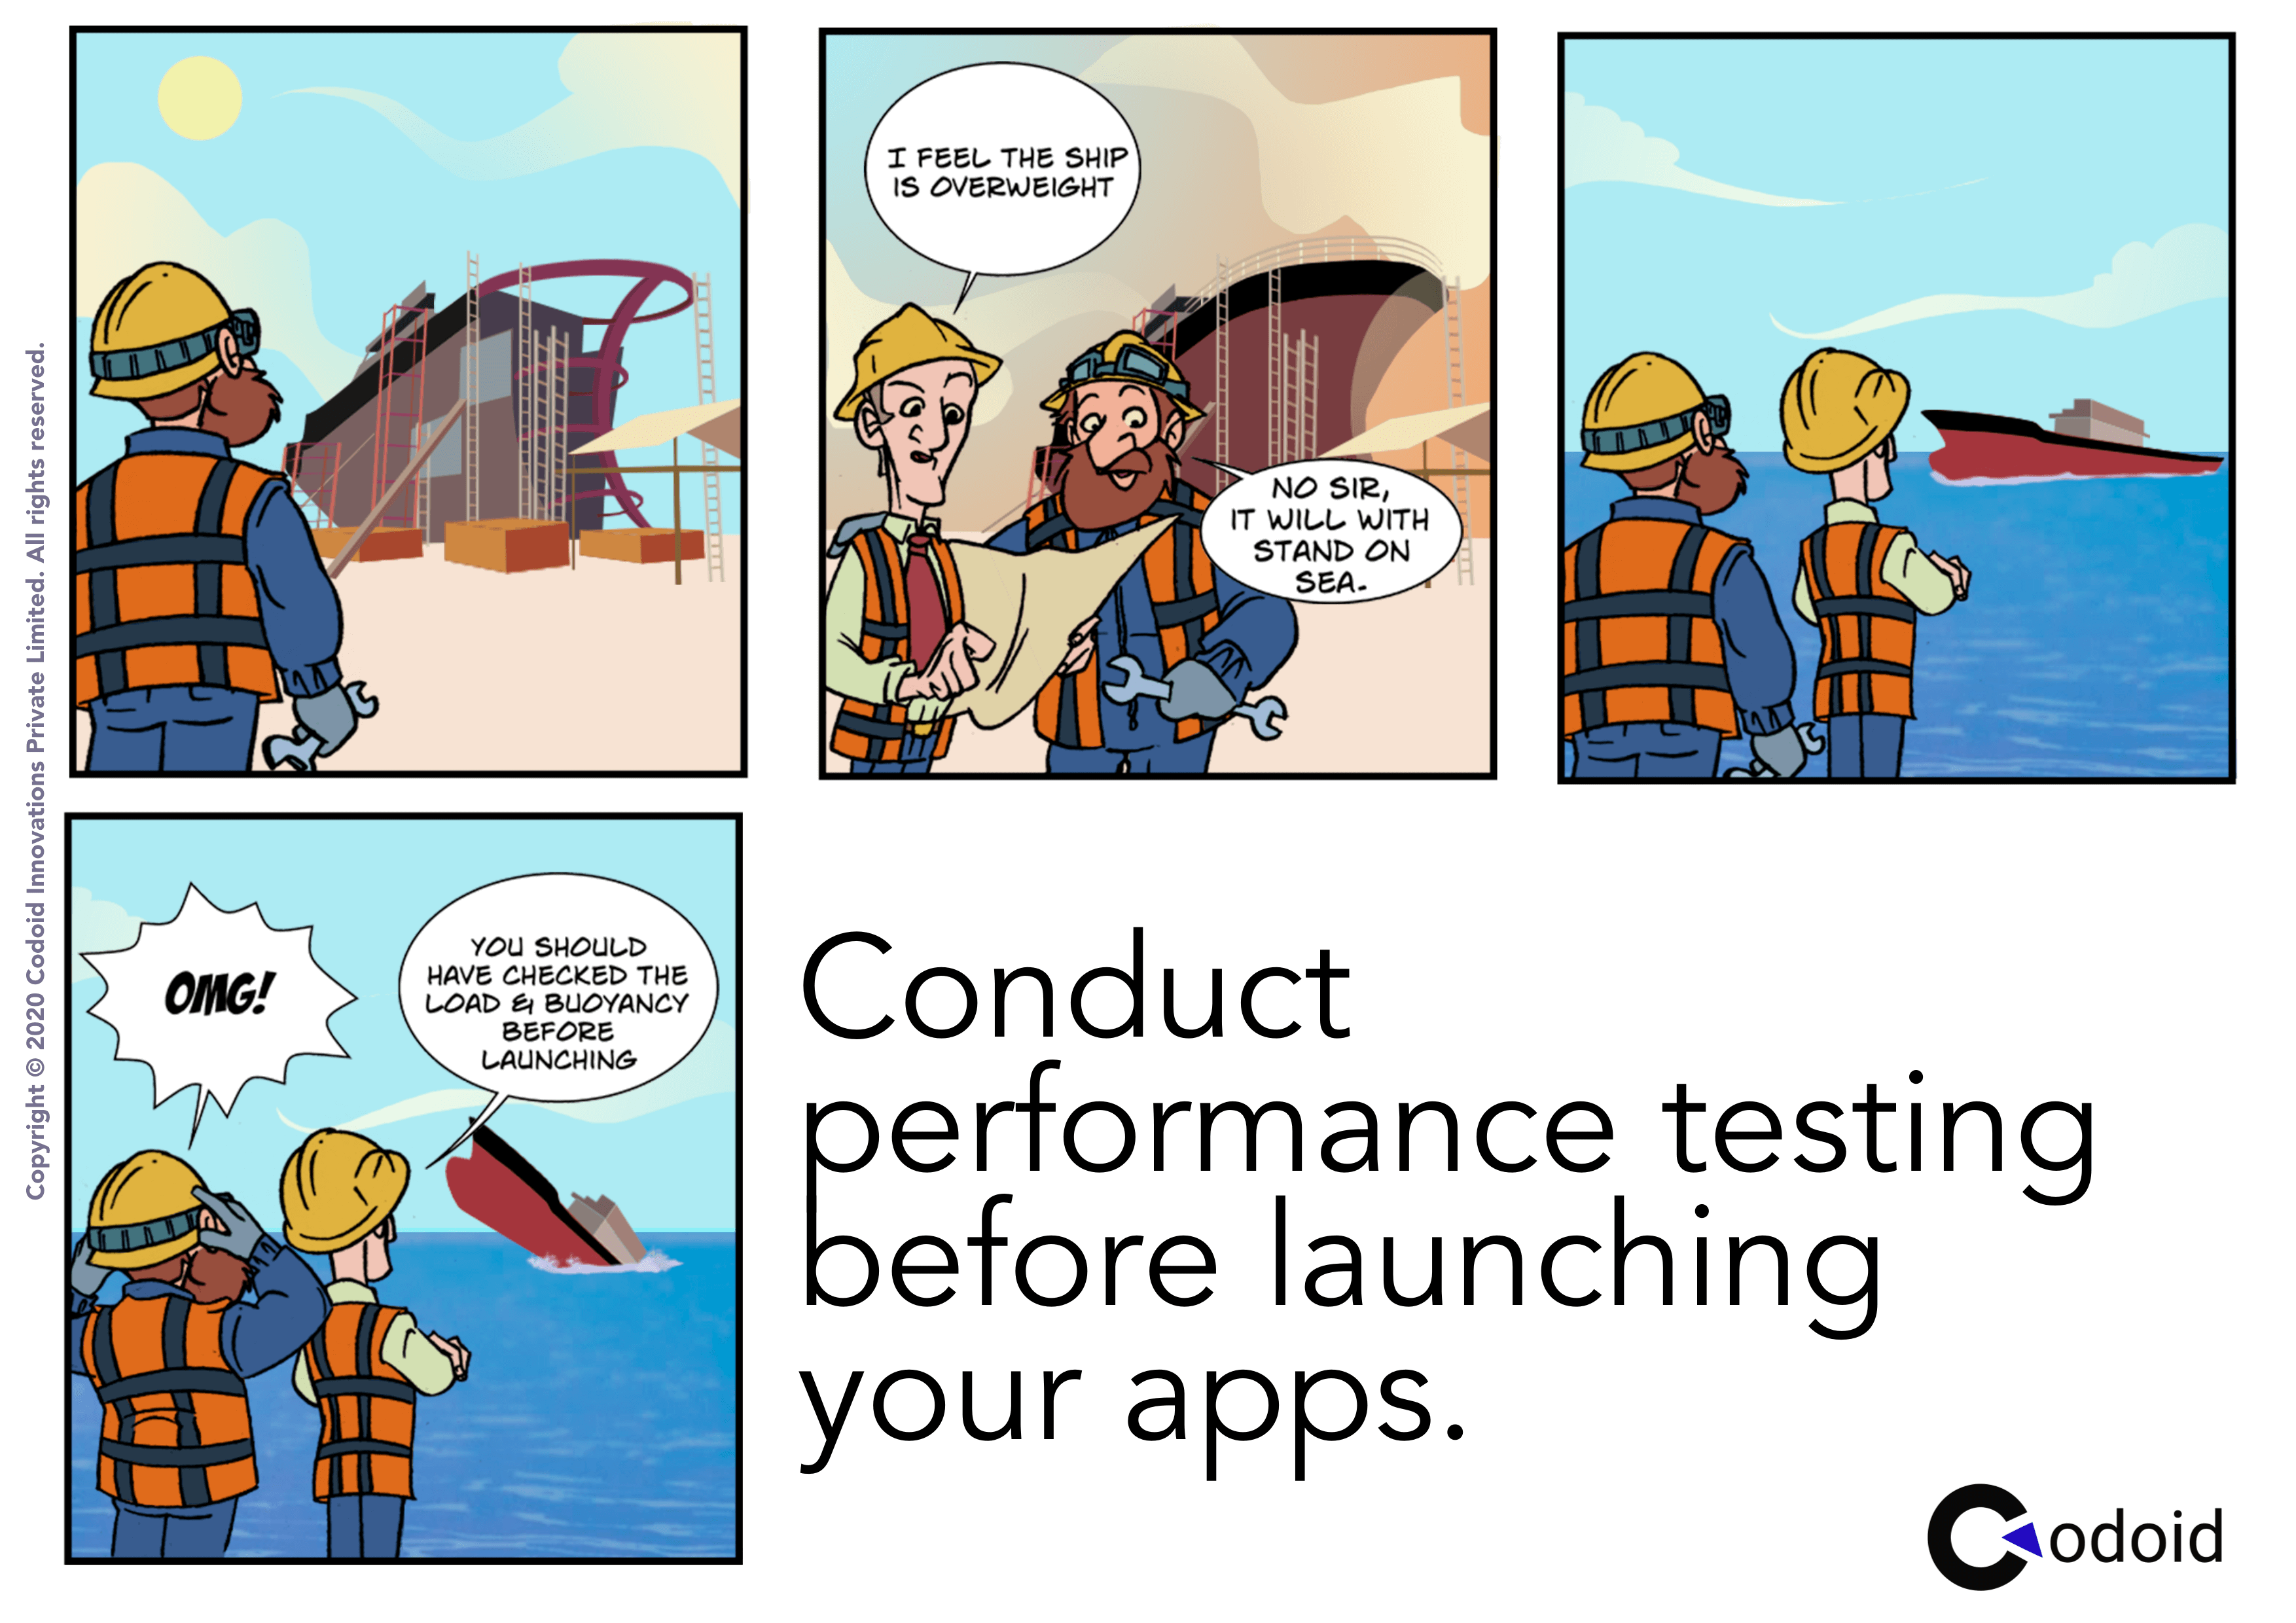 Conduct performance testing before launching your apps.